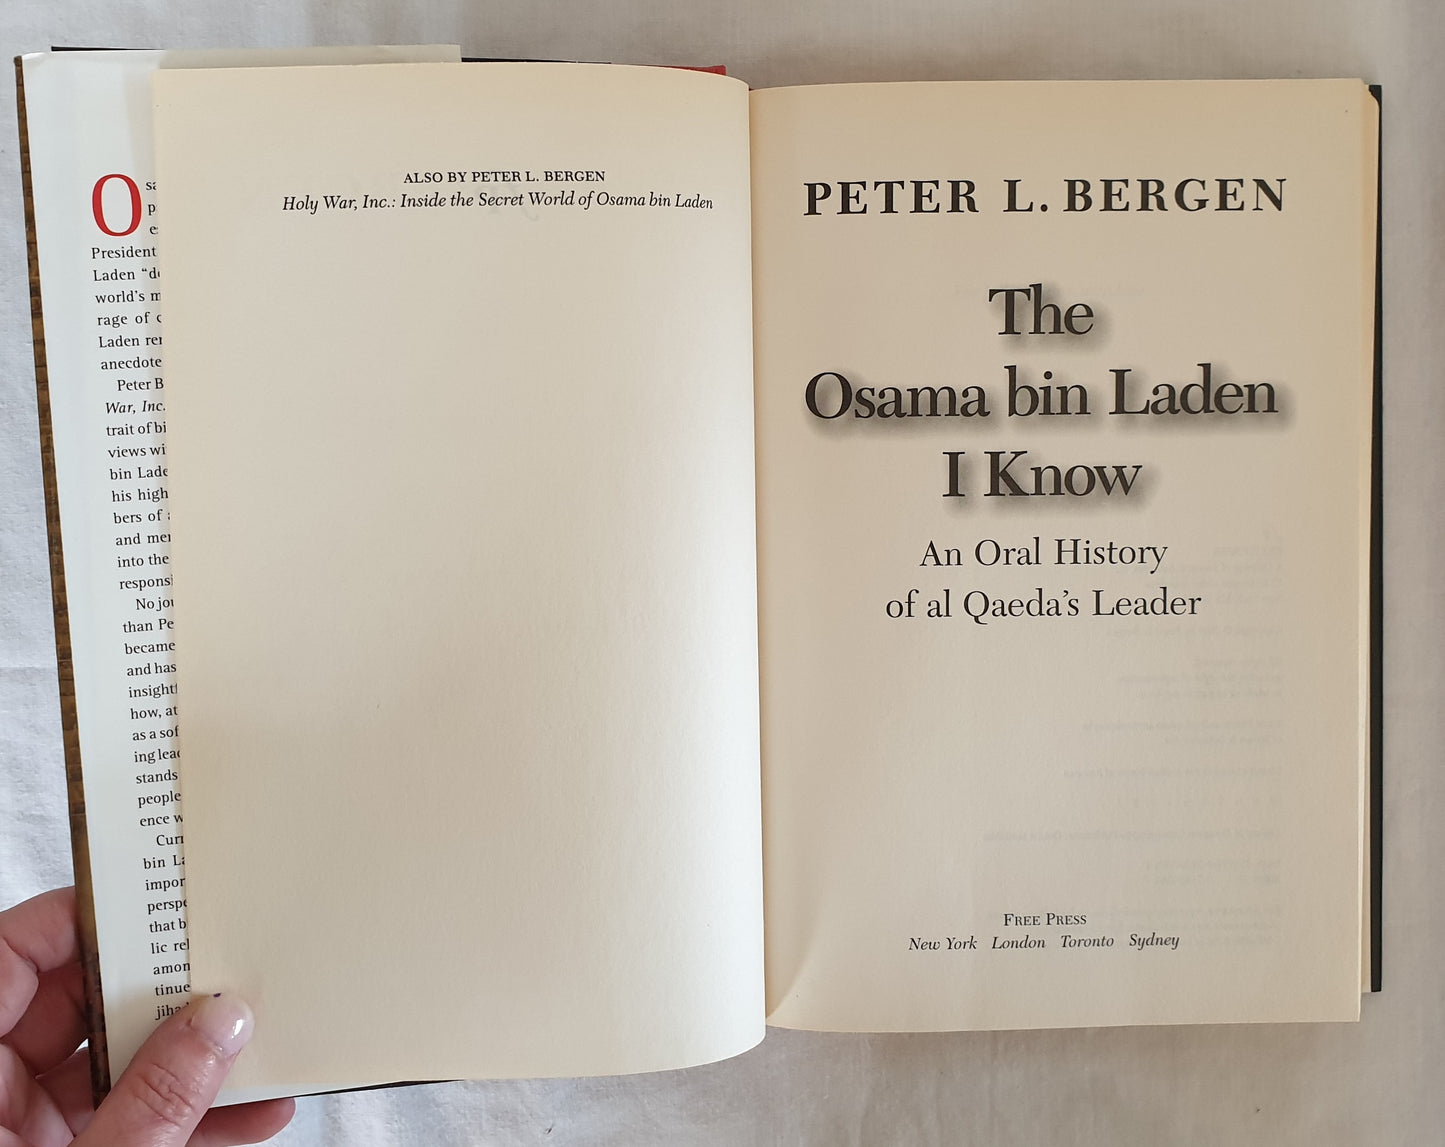 The Osama bin Laden I Know by Peter L. Bergen